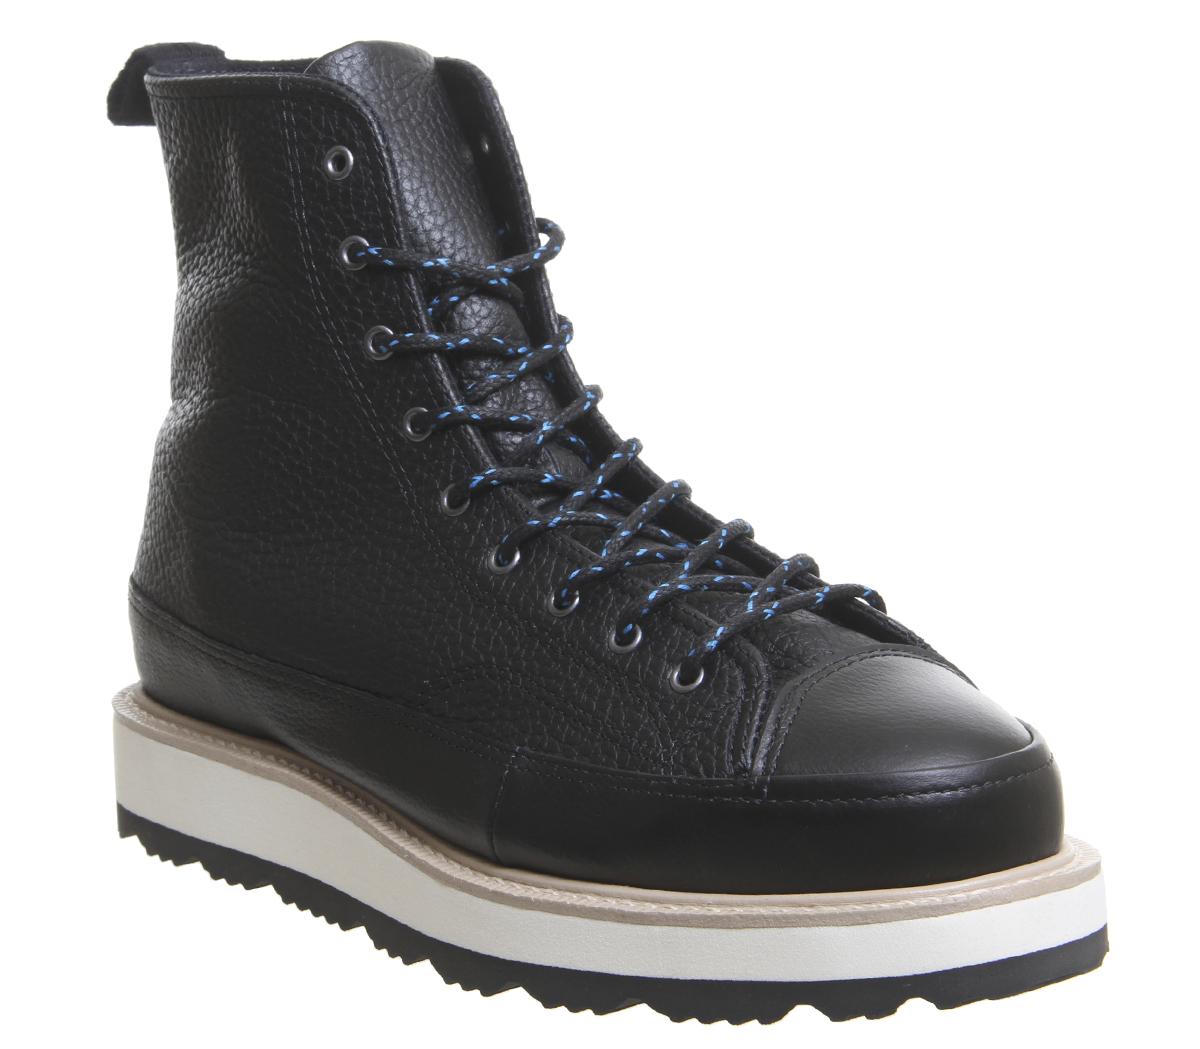 Converse Ct Crafted Boots Black Light 